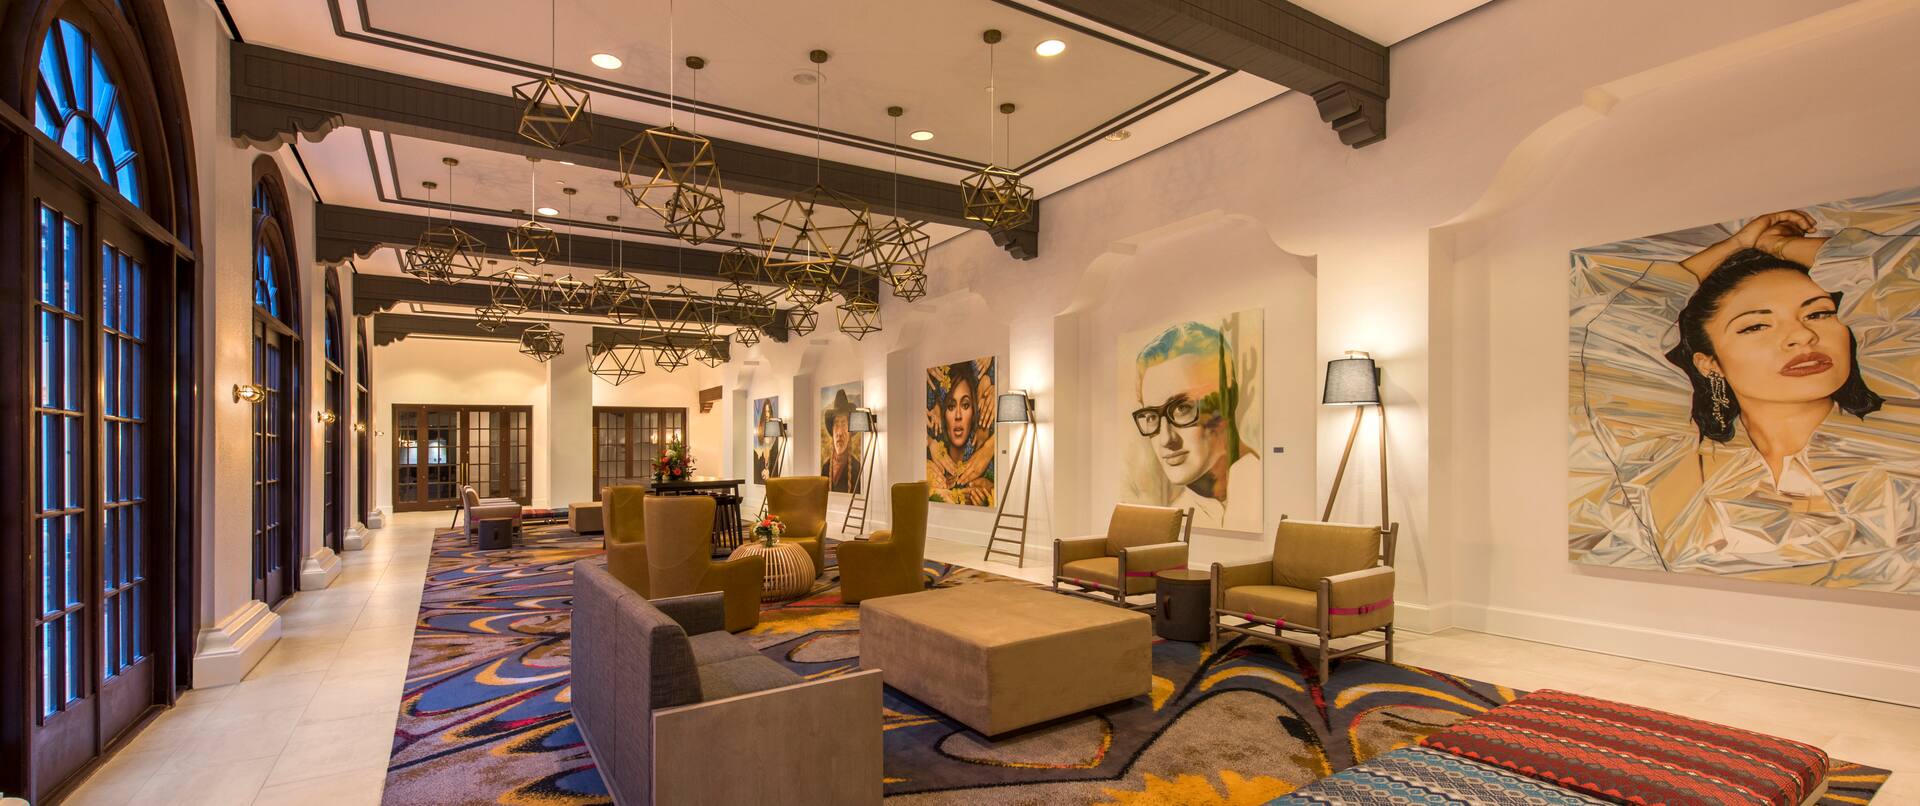 Soft Seating, Decorative Lighting, and Custom Austin Artwork on Walls in Lobby Colonnade